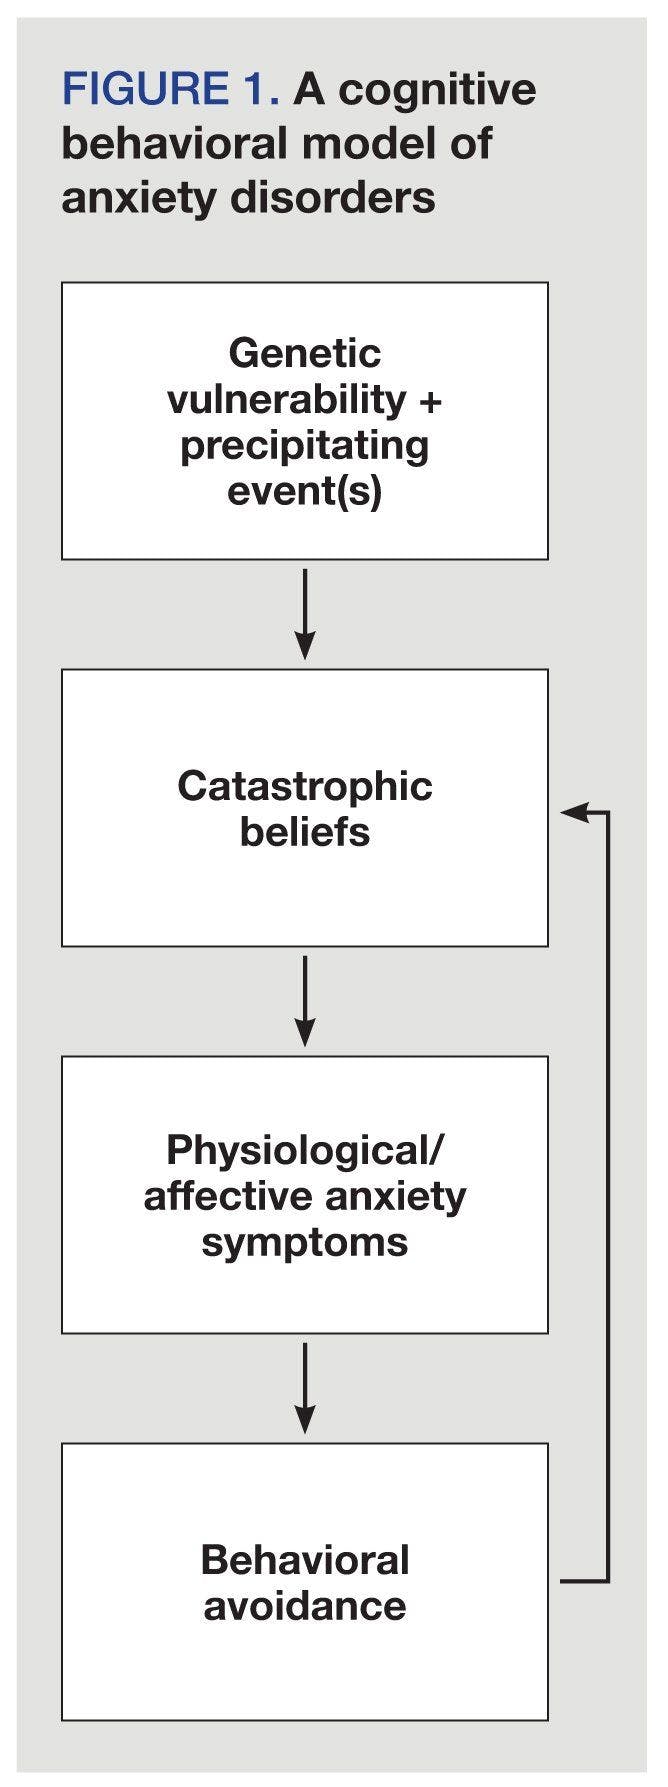 FIGURE 1. A cognitive behavioral model of anxiety disorders